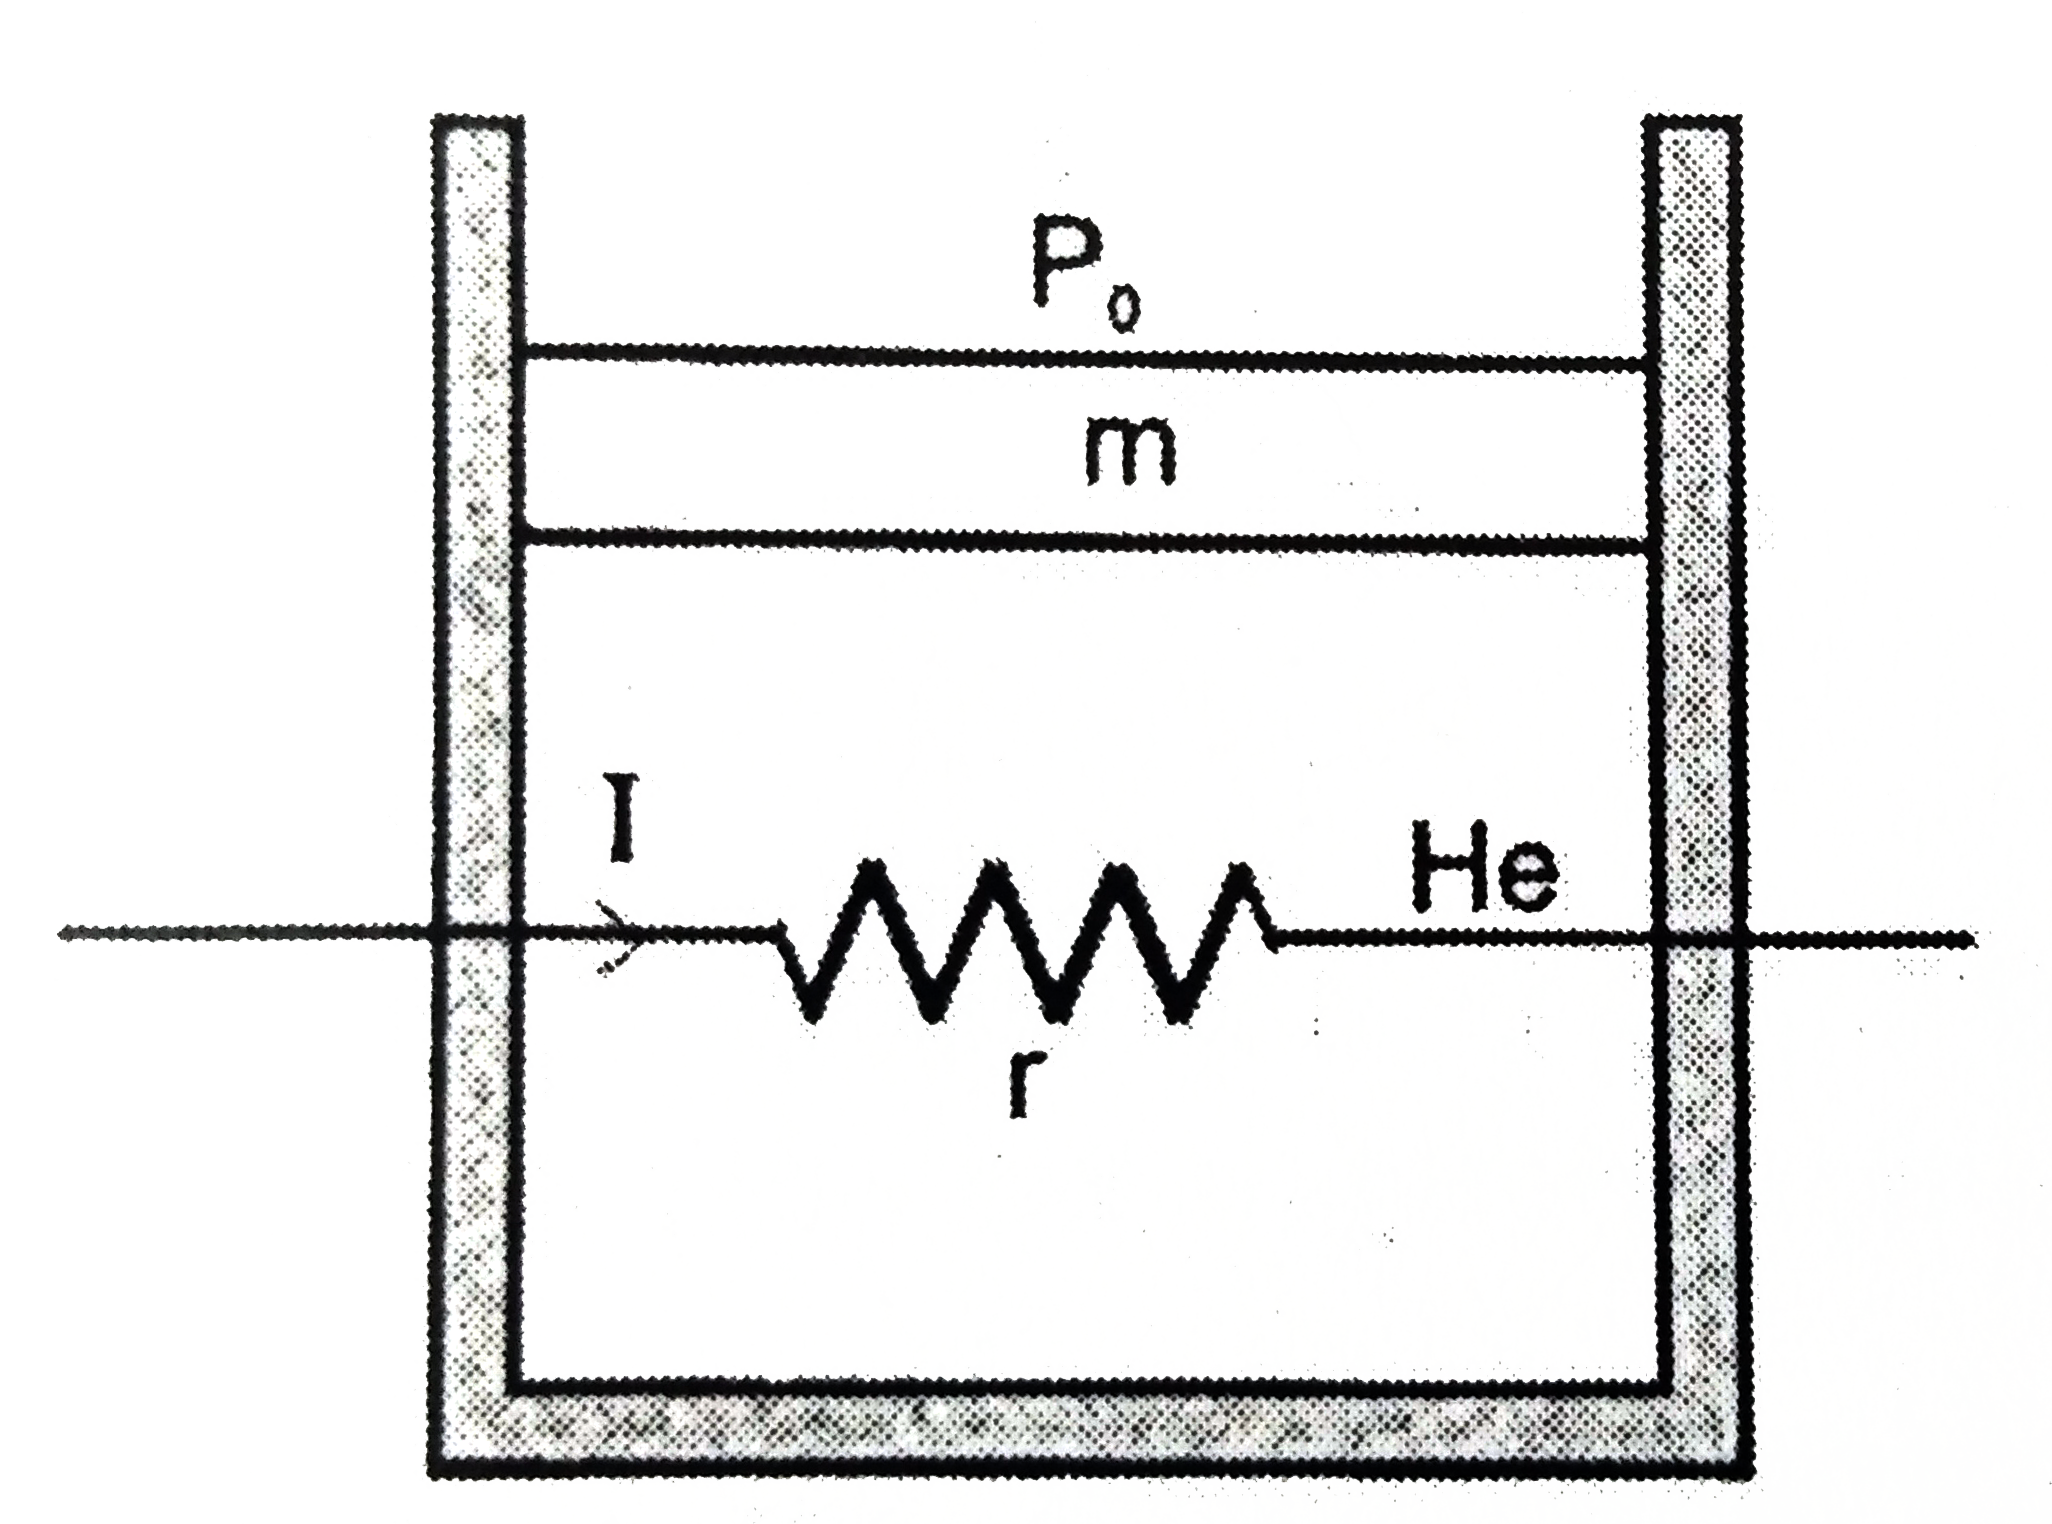 A resistance coil of resistance r connected to an external battery, is placed inside an adiabatic cylinder fitted with a frictionless platon of mass m and same area A. Initially cylinder contains one mole of ideal gas he. A current through the coil such that temperature of gas varies as T=T(0)+